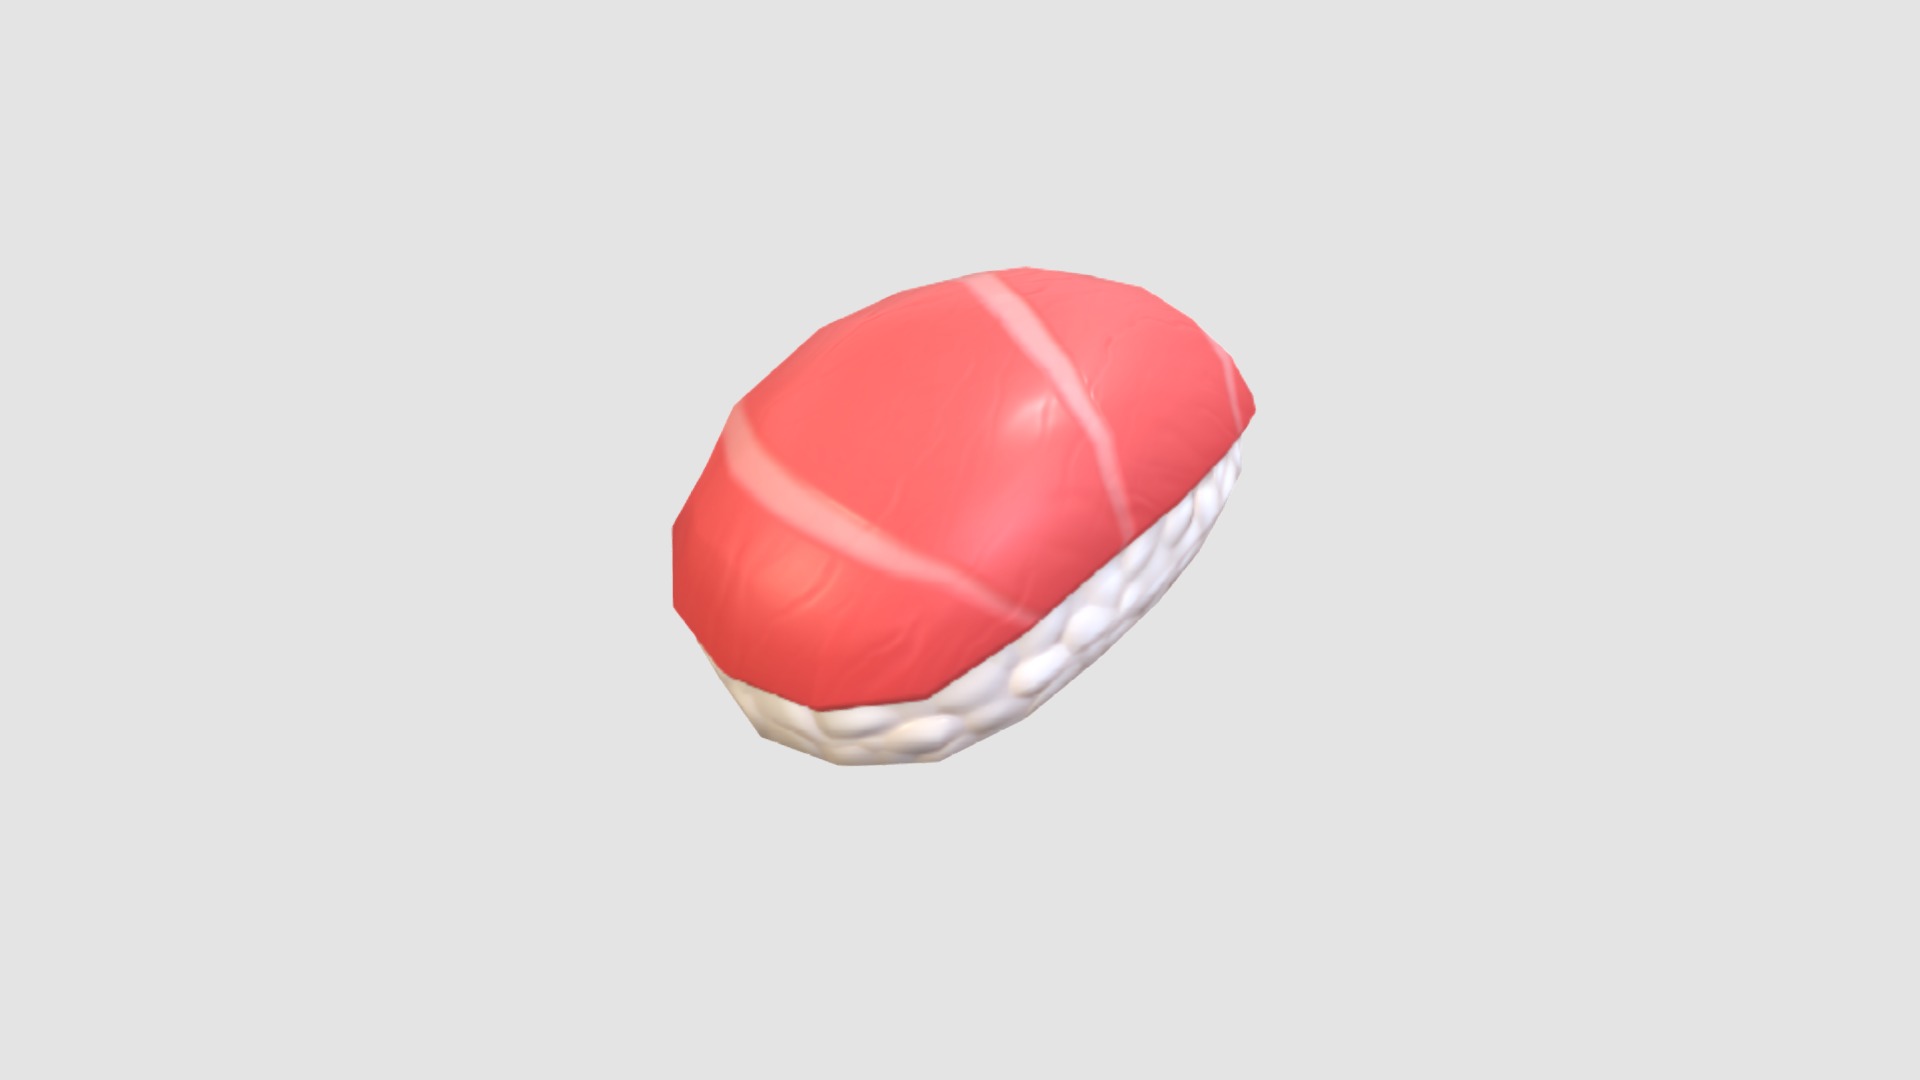 3D model Sushi - This is a 3D model of the Sushi. The 3D model is about a red and white ice cream cone.